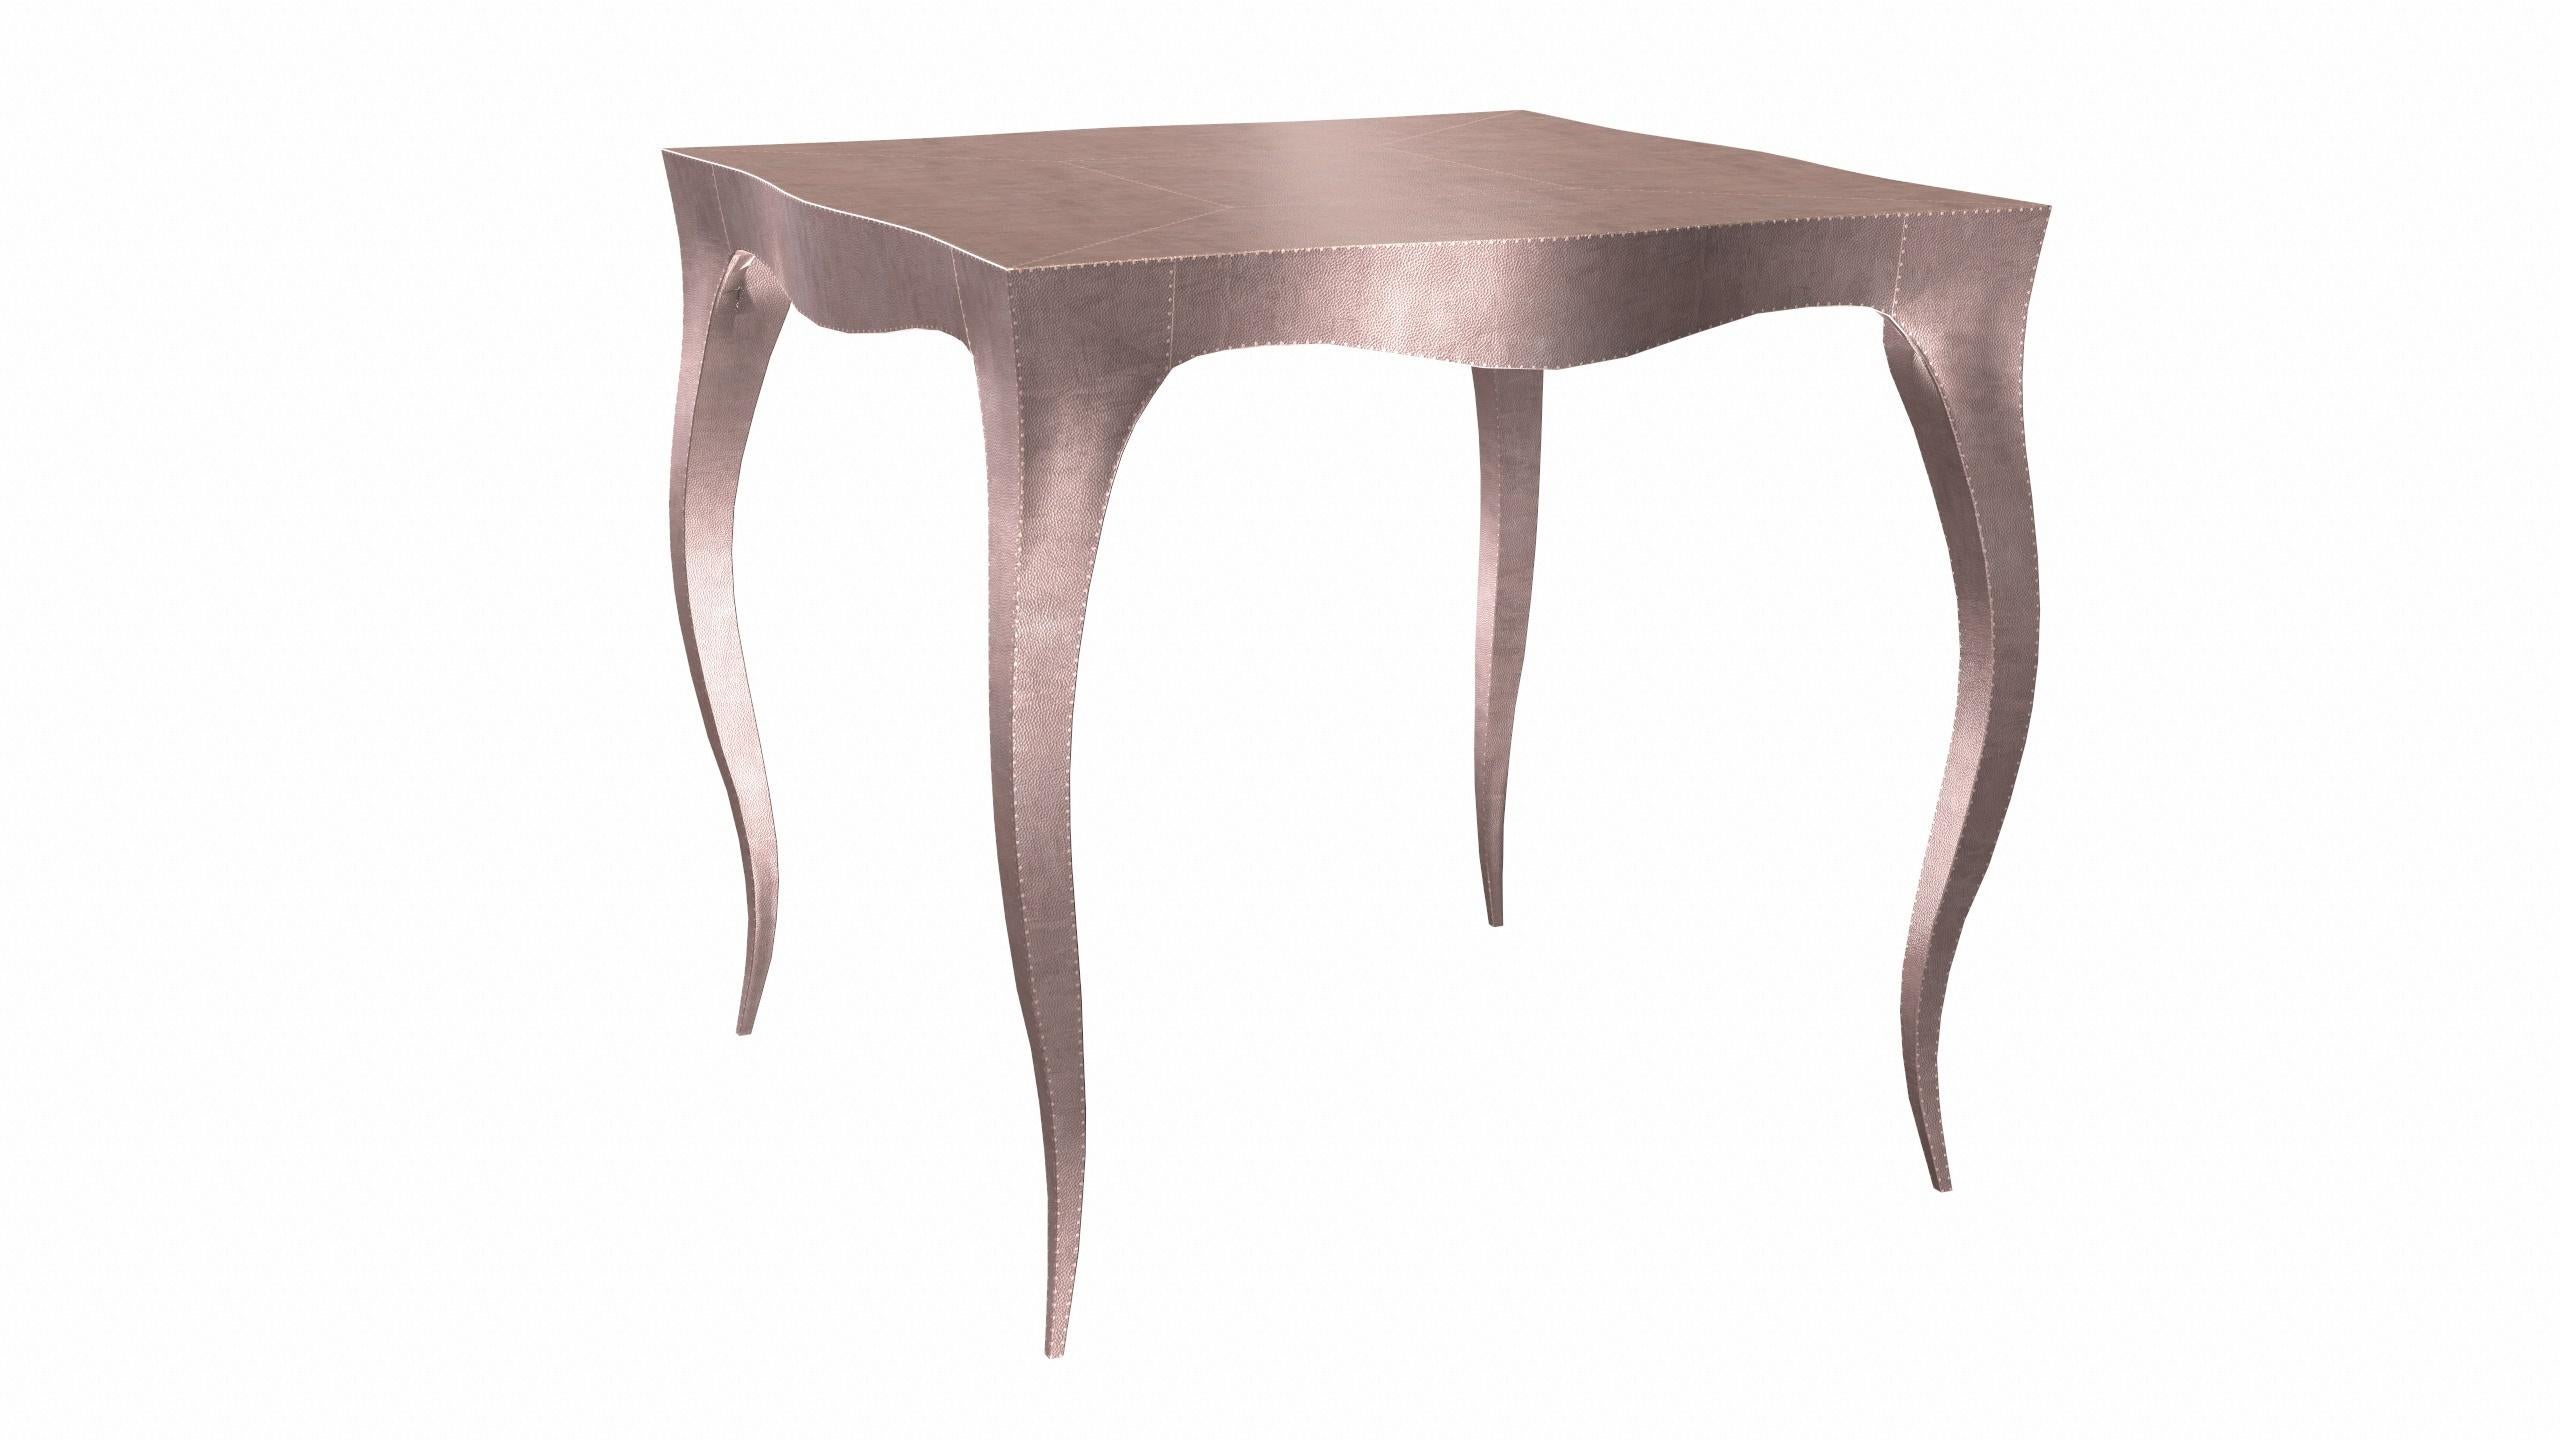 Hand-Carved Louise Art Deco Card and Tea Tables Mid. Hammered Copper by Paul Mathieu For Sale